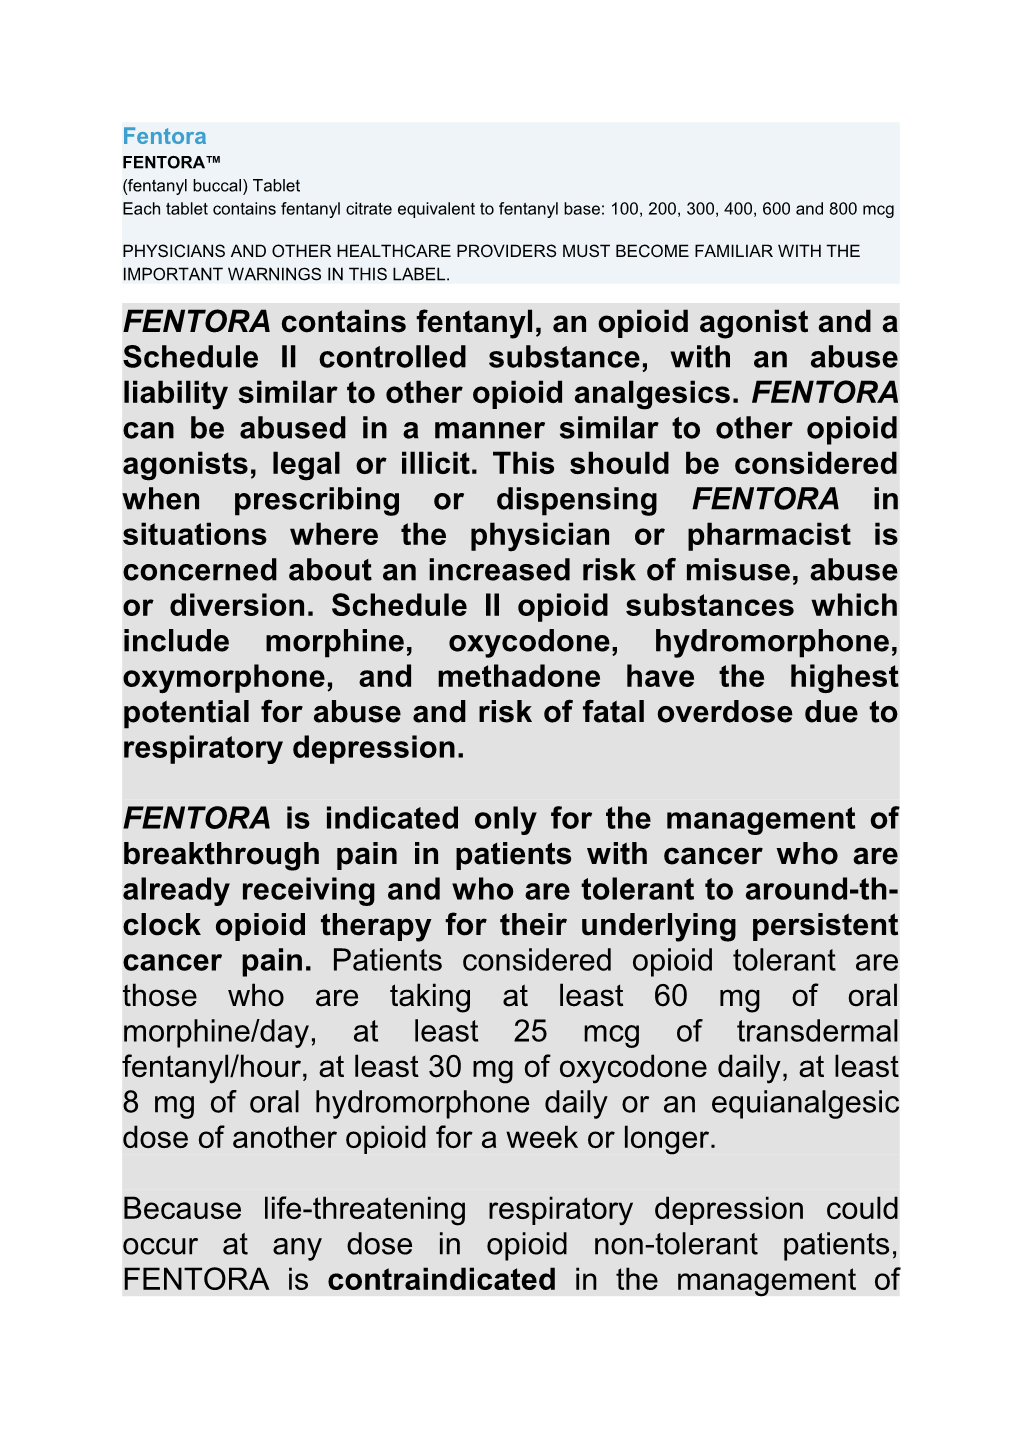 FENTORA (Fentanyl Buccal) Tablet Each Tablet Contains Fentanyl Citrate Equivalent to Fentanyl